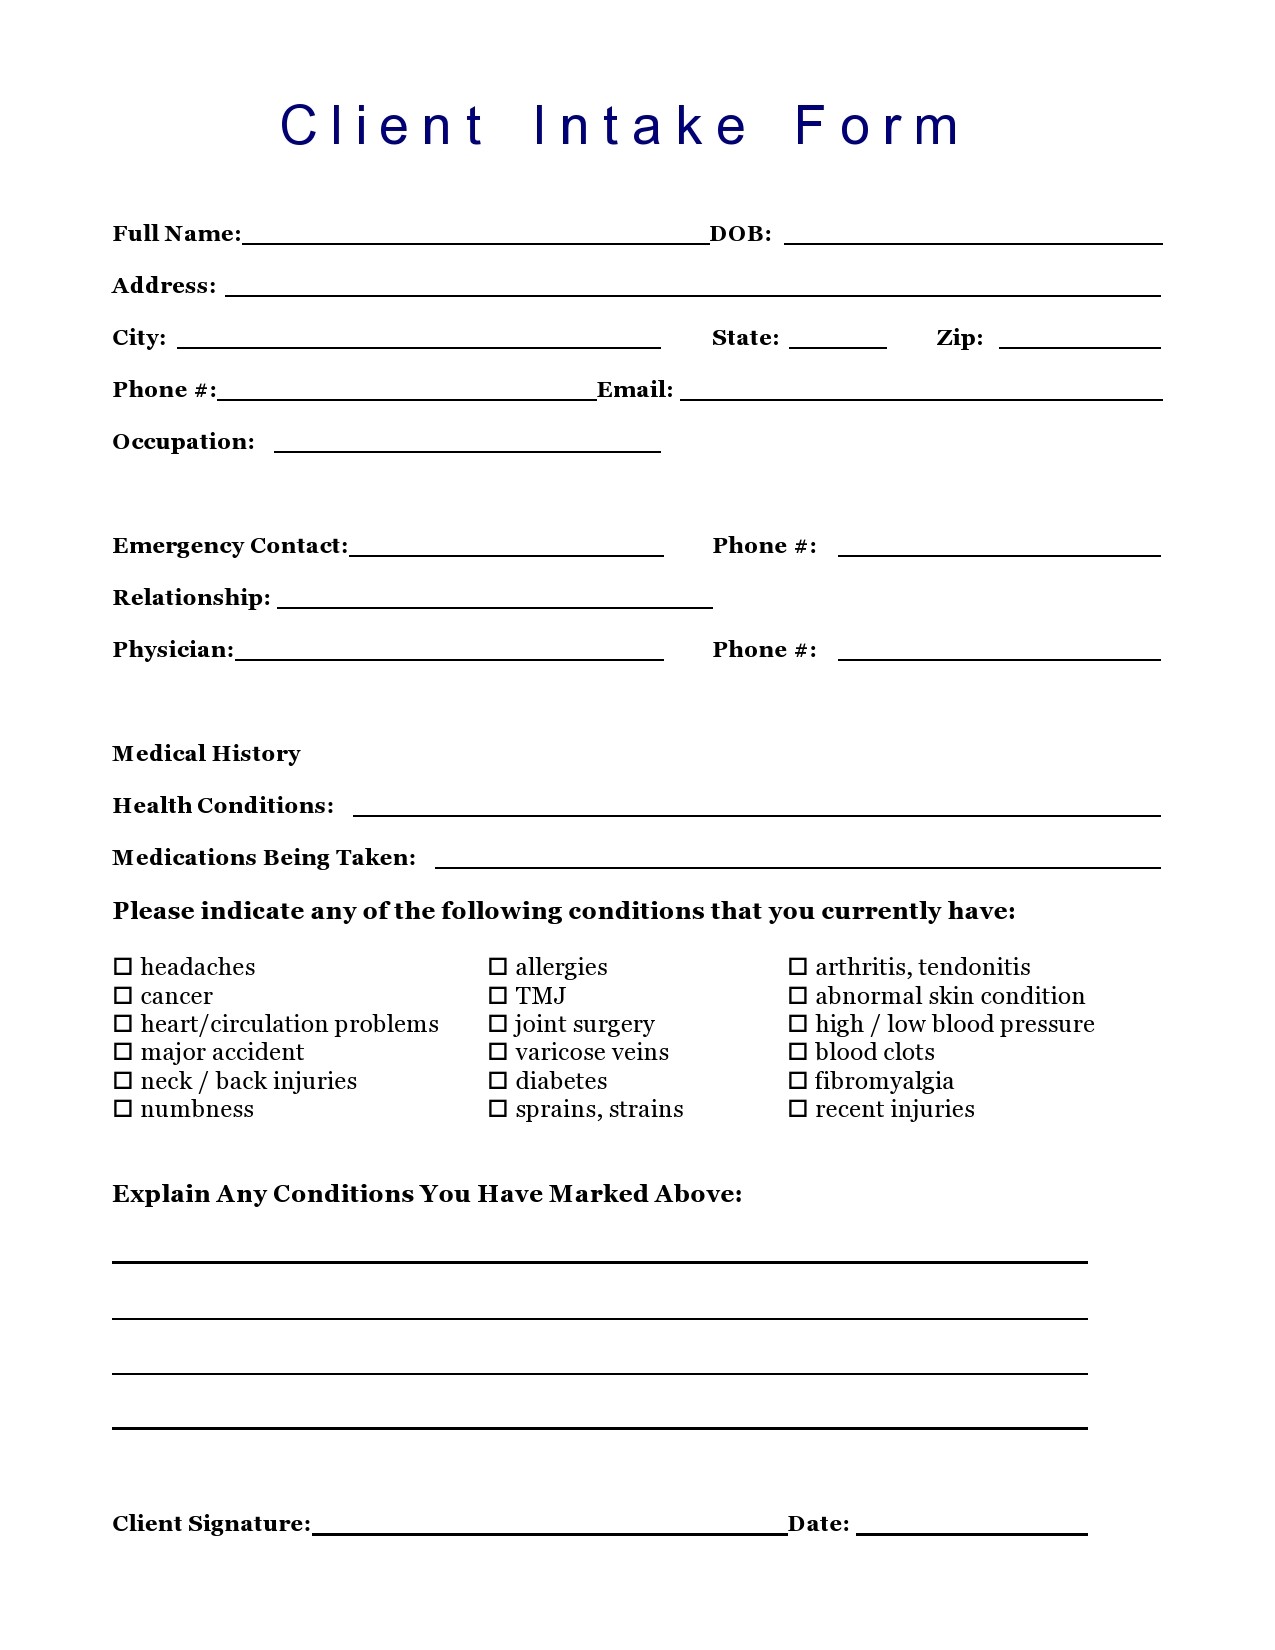 Free client intake form 08